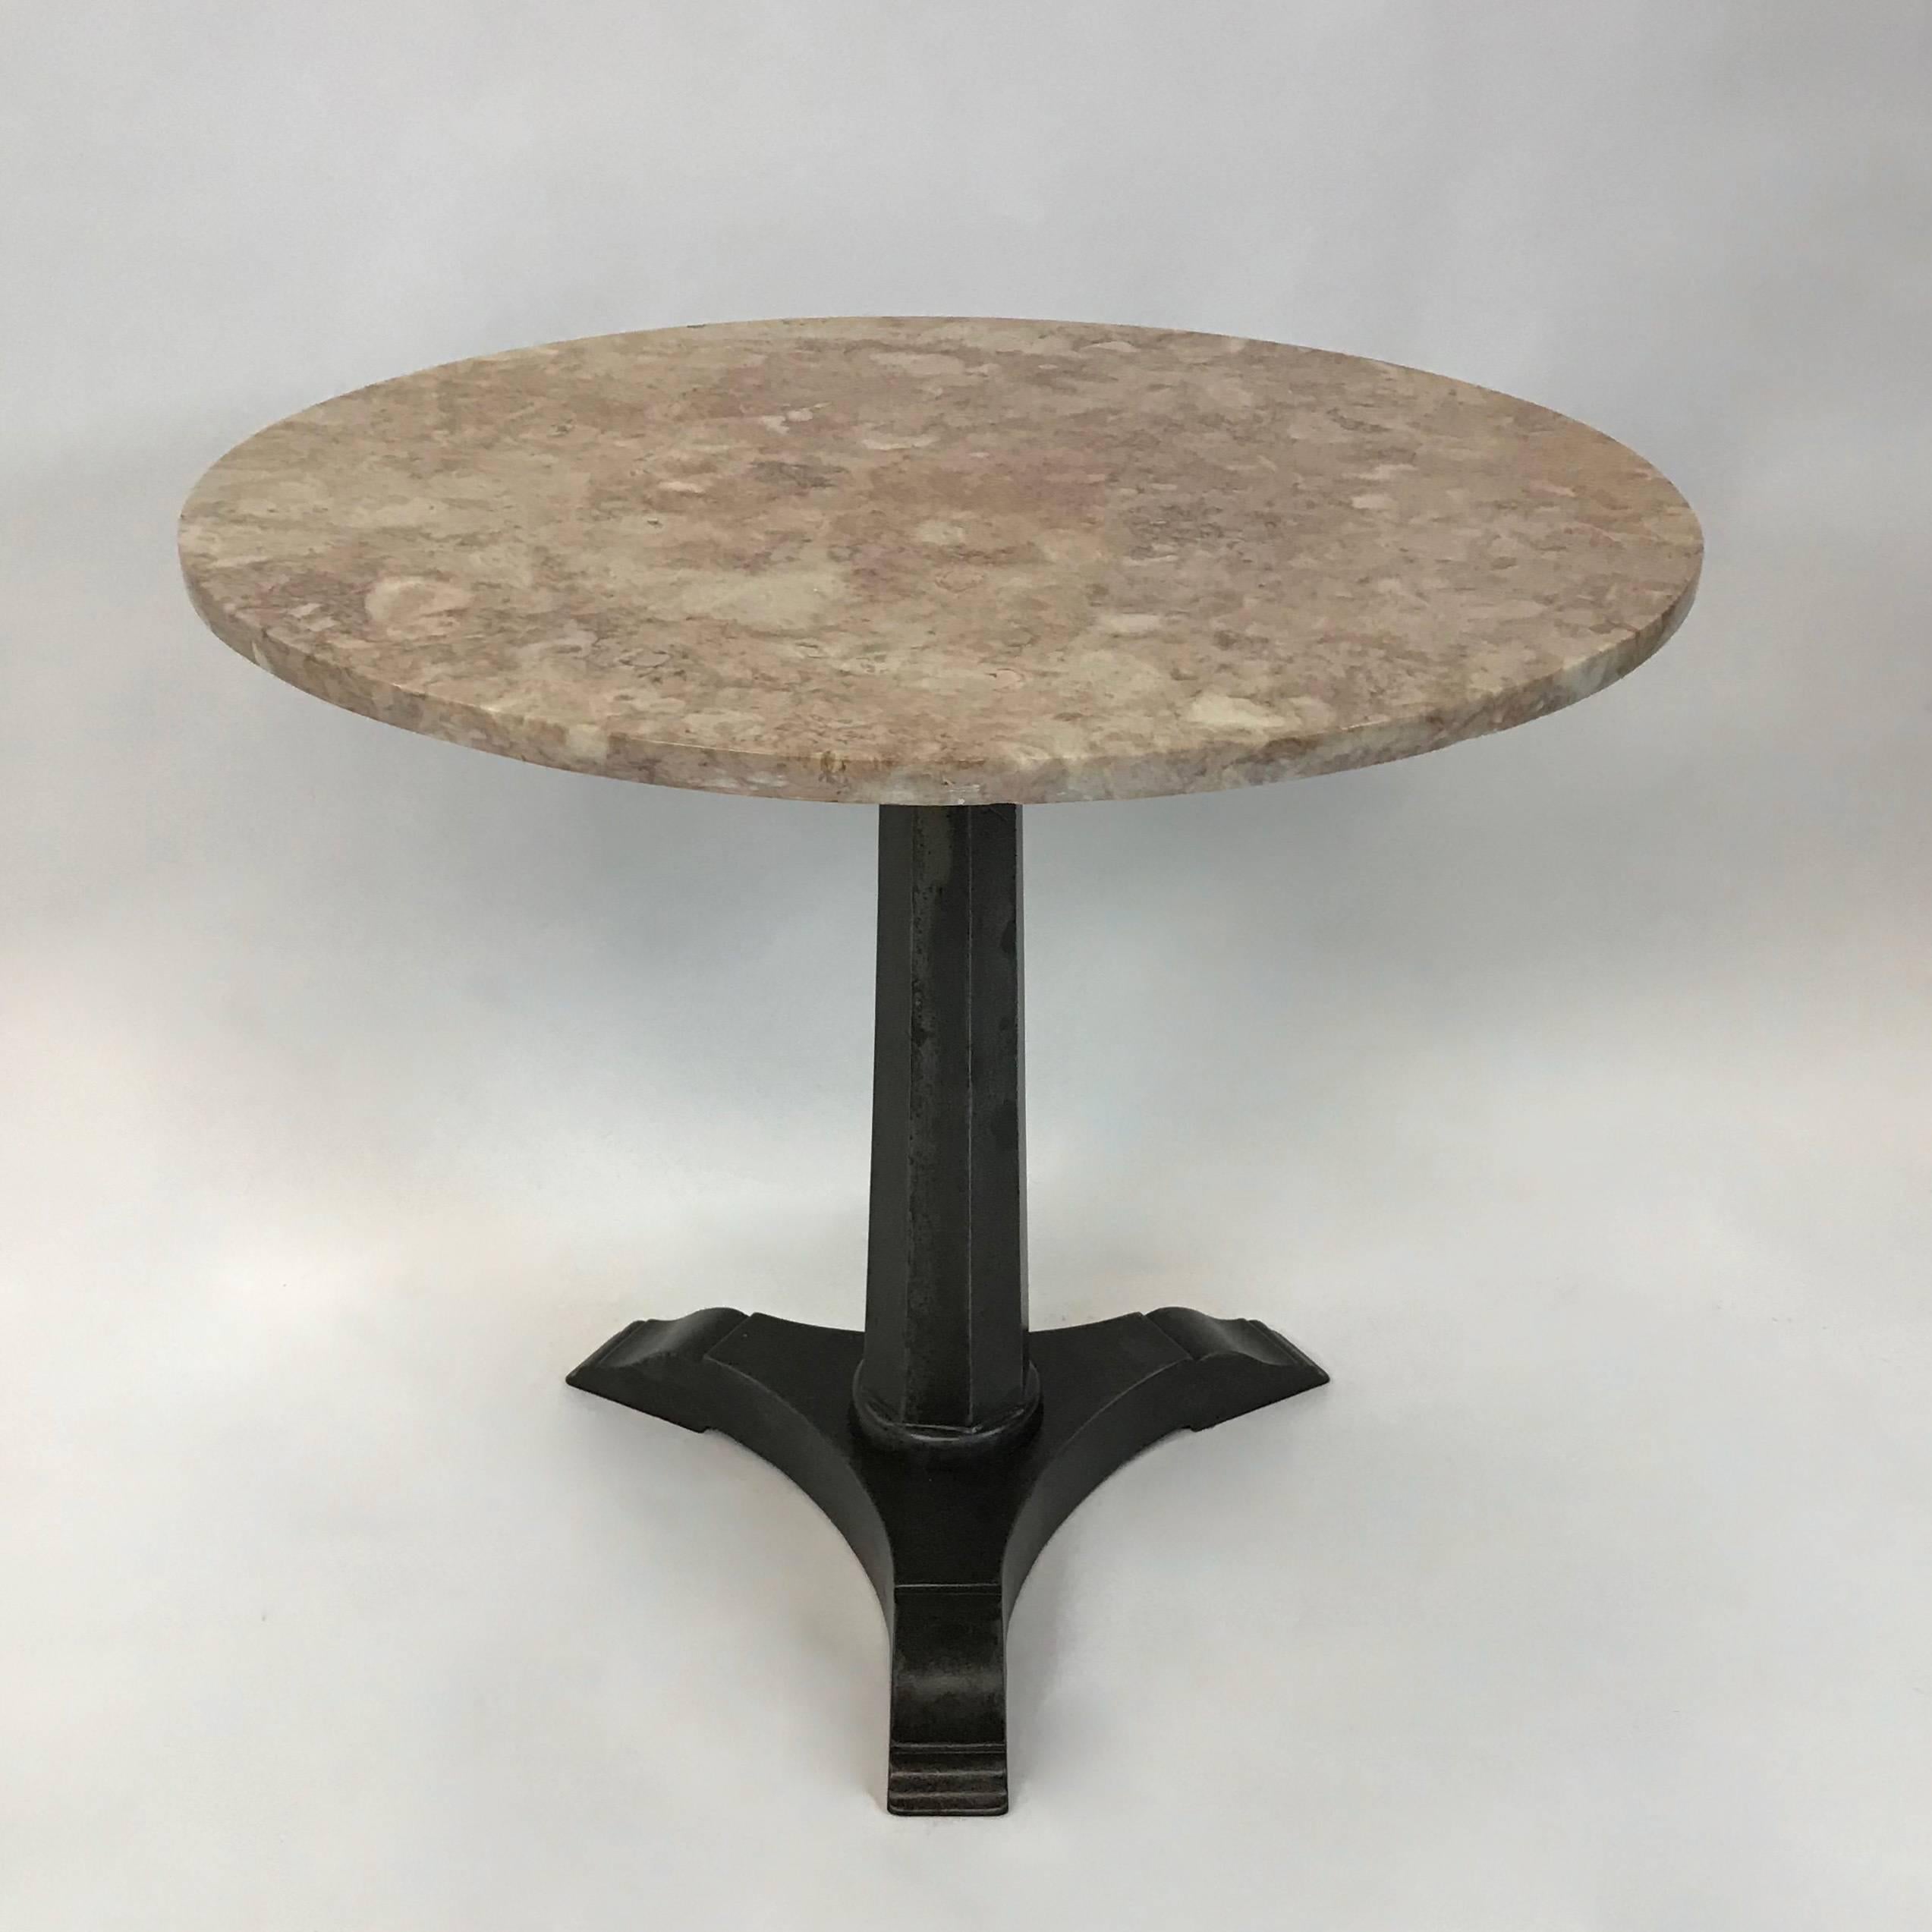 Cafe, bistro, dining table features a 36 inch round, blush pink marble top with Art Deco, cast iron, skyscraper pedestal base.